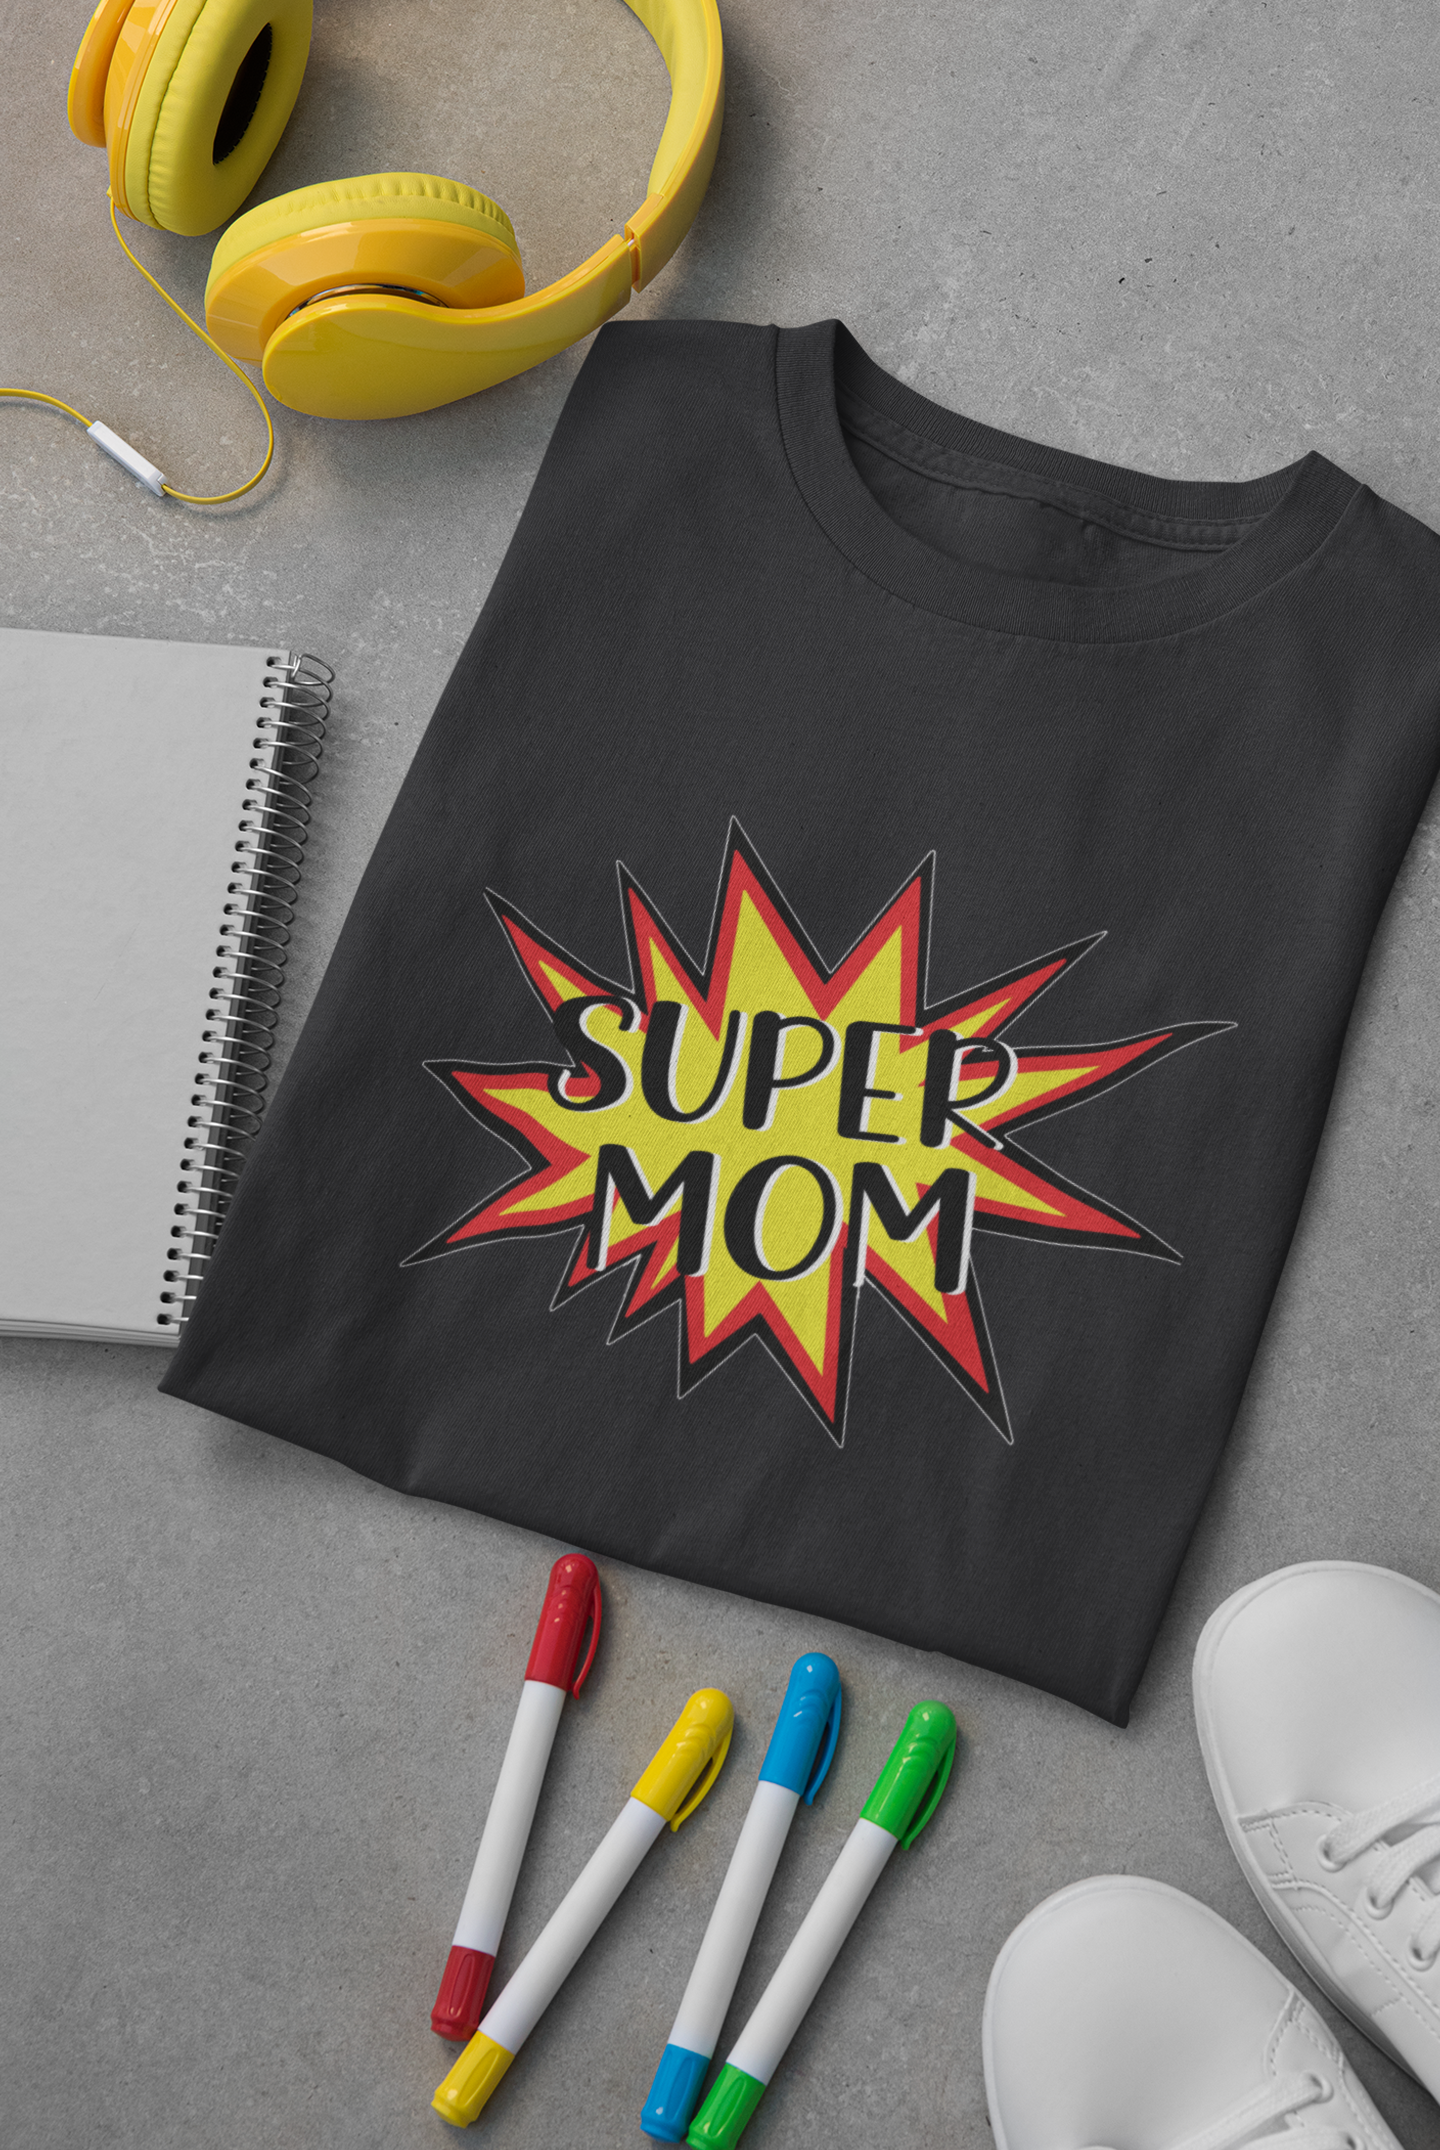 Super Son Mother And Son Black Matching T-Shirt- FunkyTeesClub